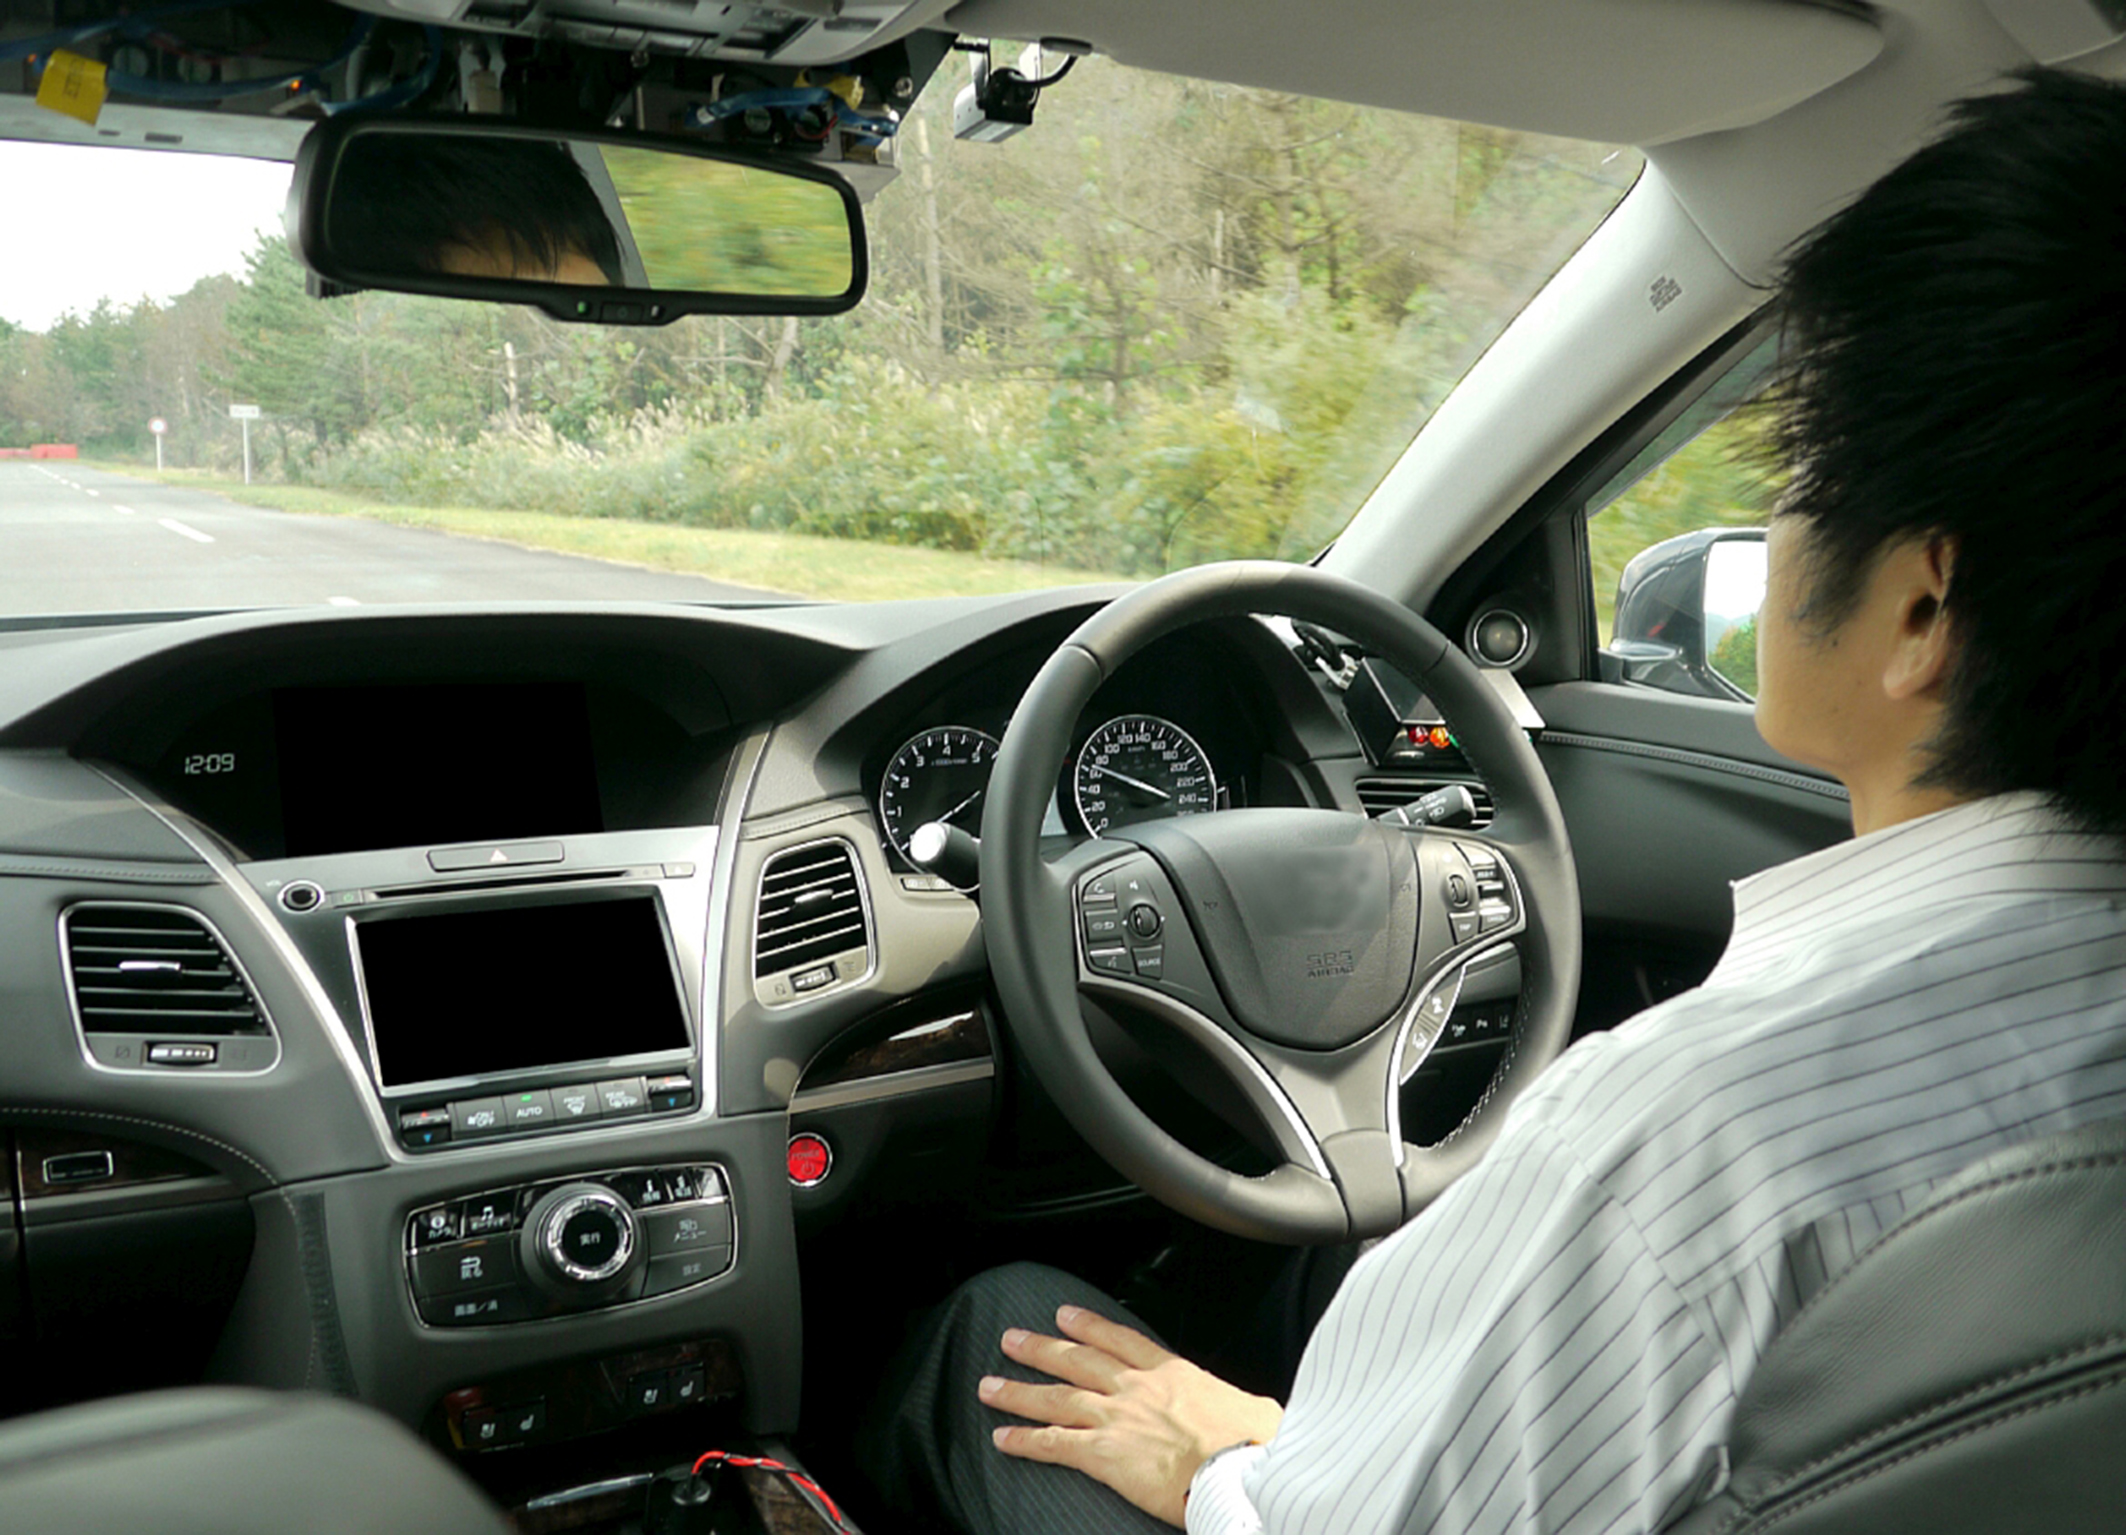 Bosch now testing automated driving on roads in Japan as well